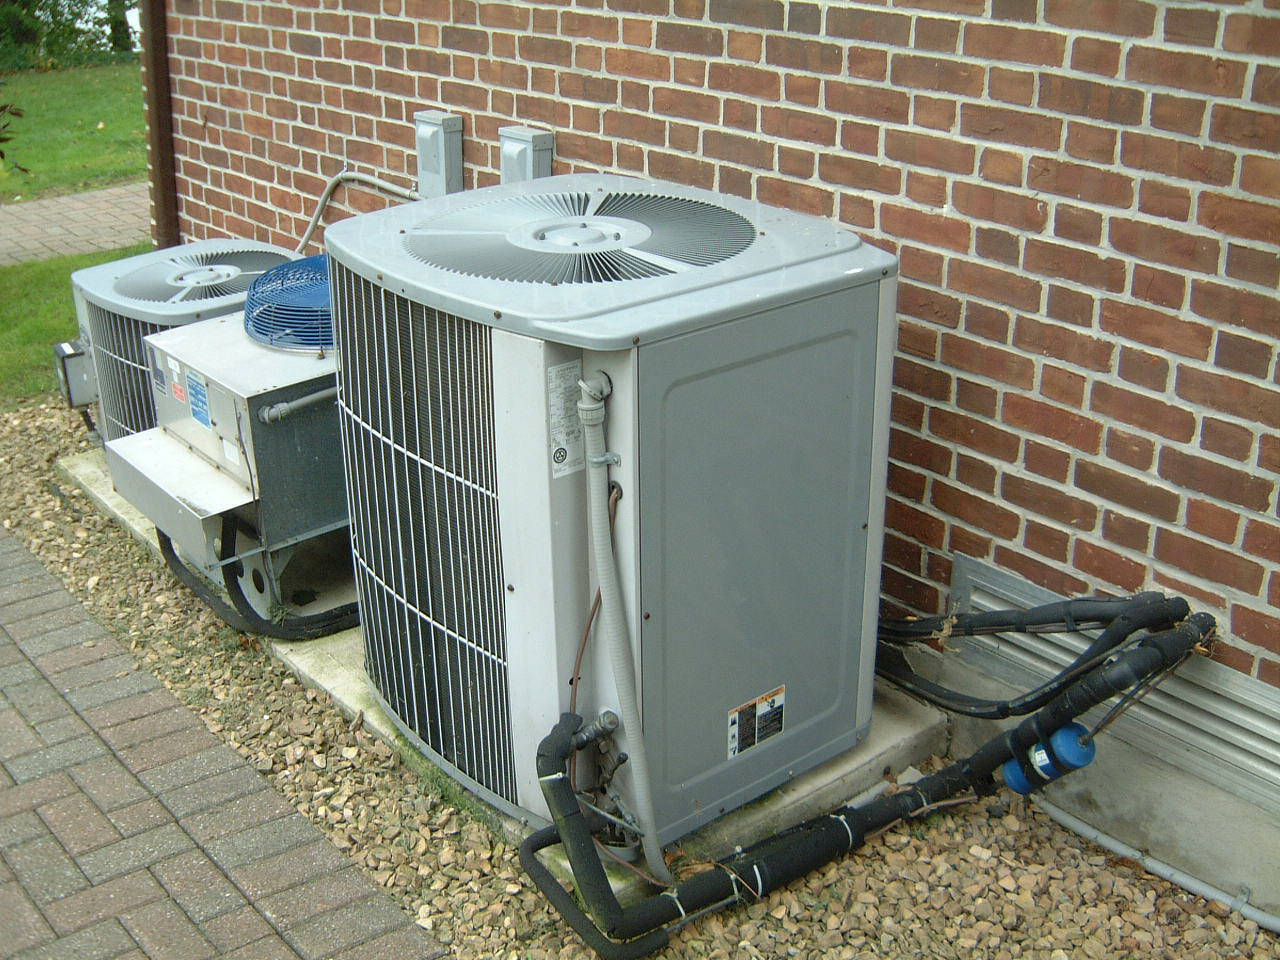 HOW TO KNOW IF IT’S TIME TO REPLACE YOUR OLDER AC?